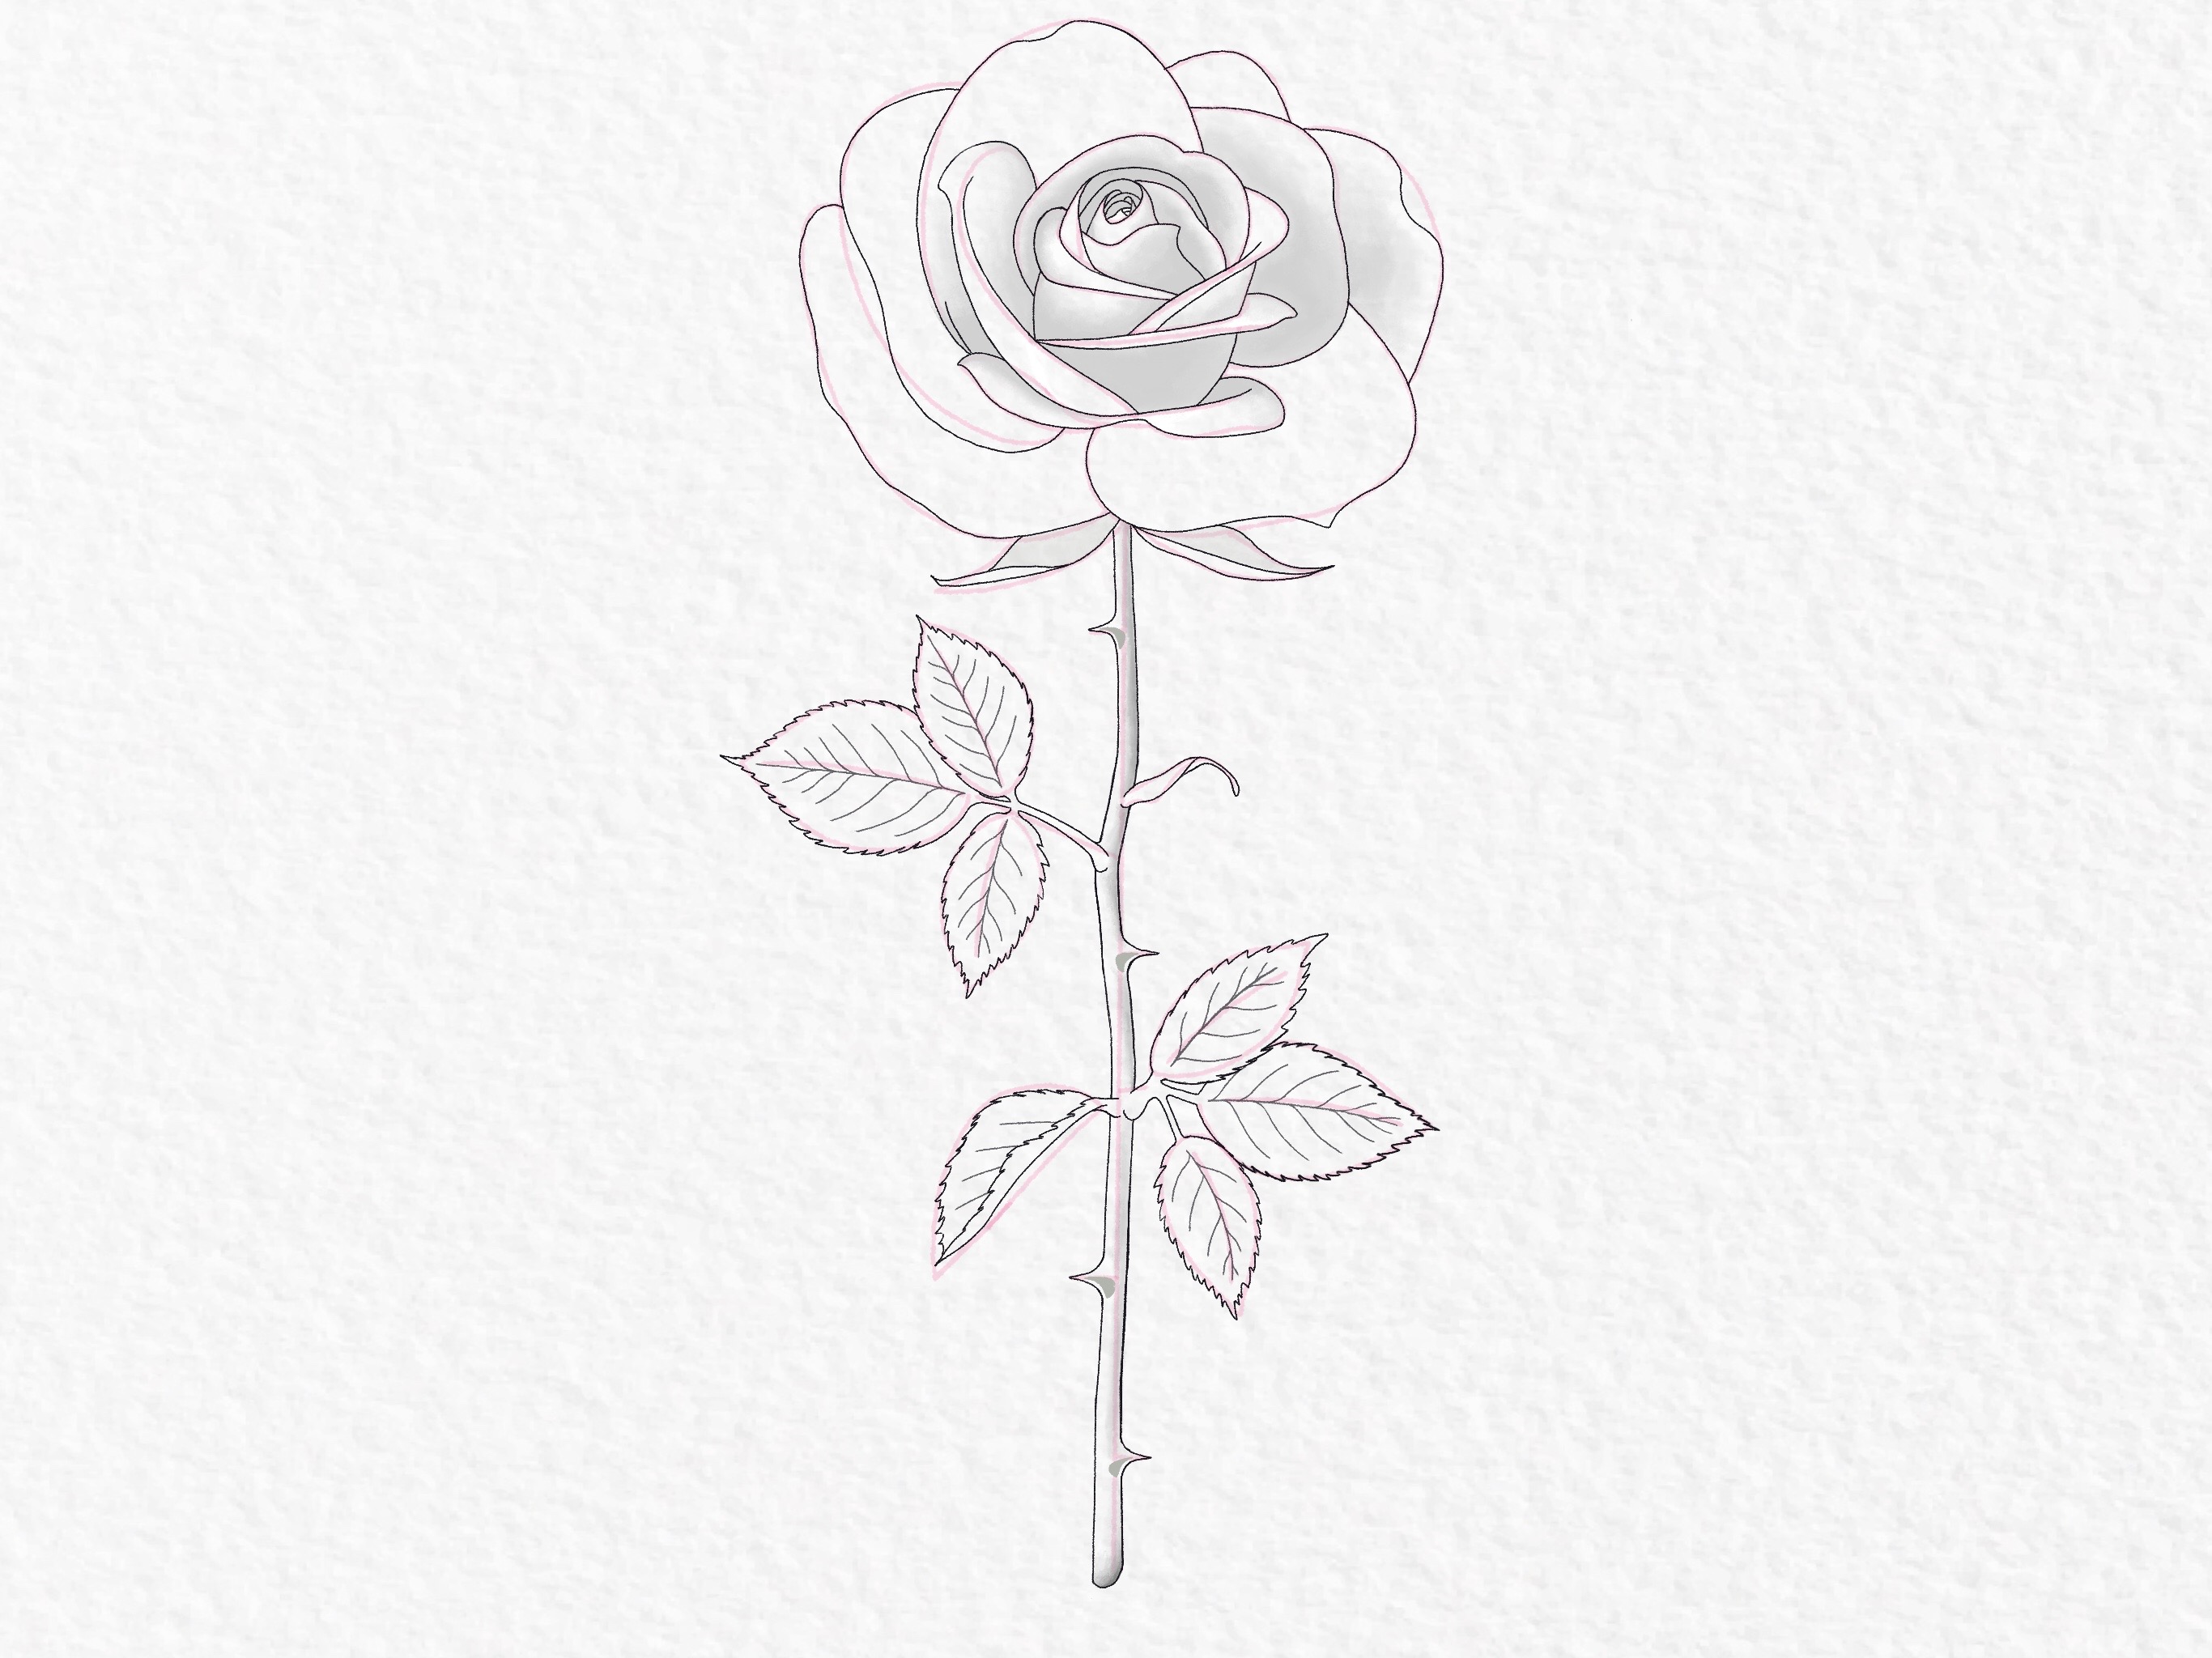 How to draw a rose - rose drawing made easy